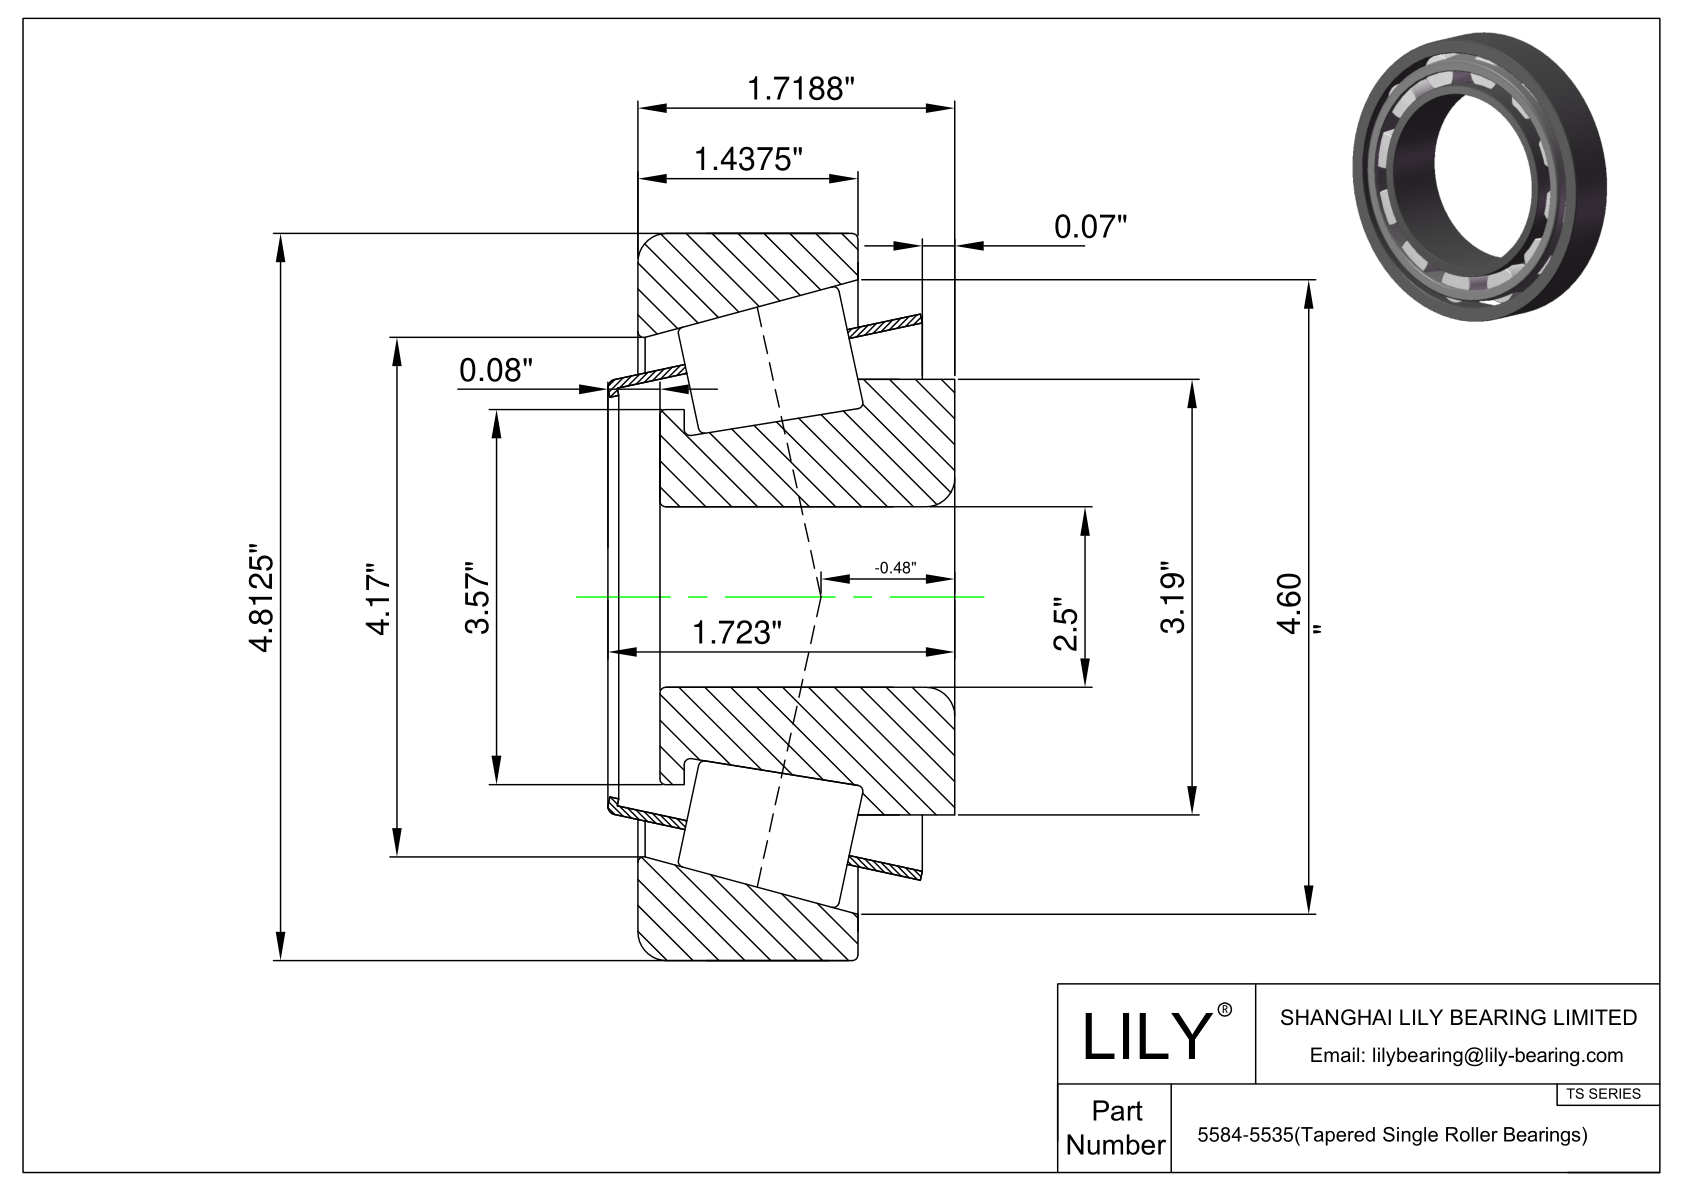 5584-5535 TS (Tapered Single Roller Bearings) (Imperial) cad drawing